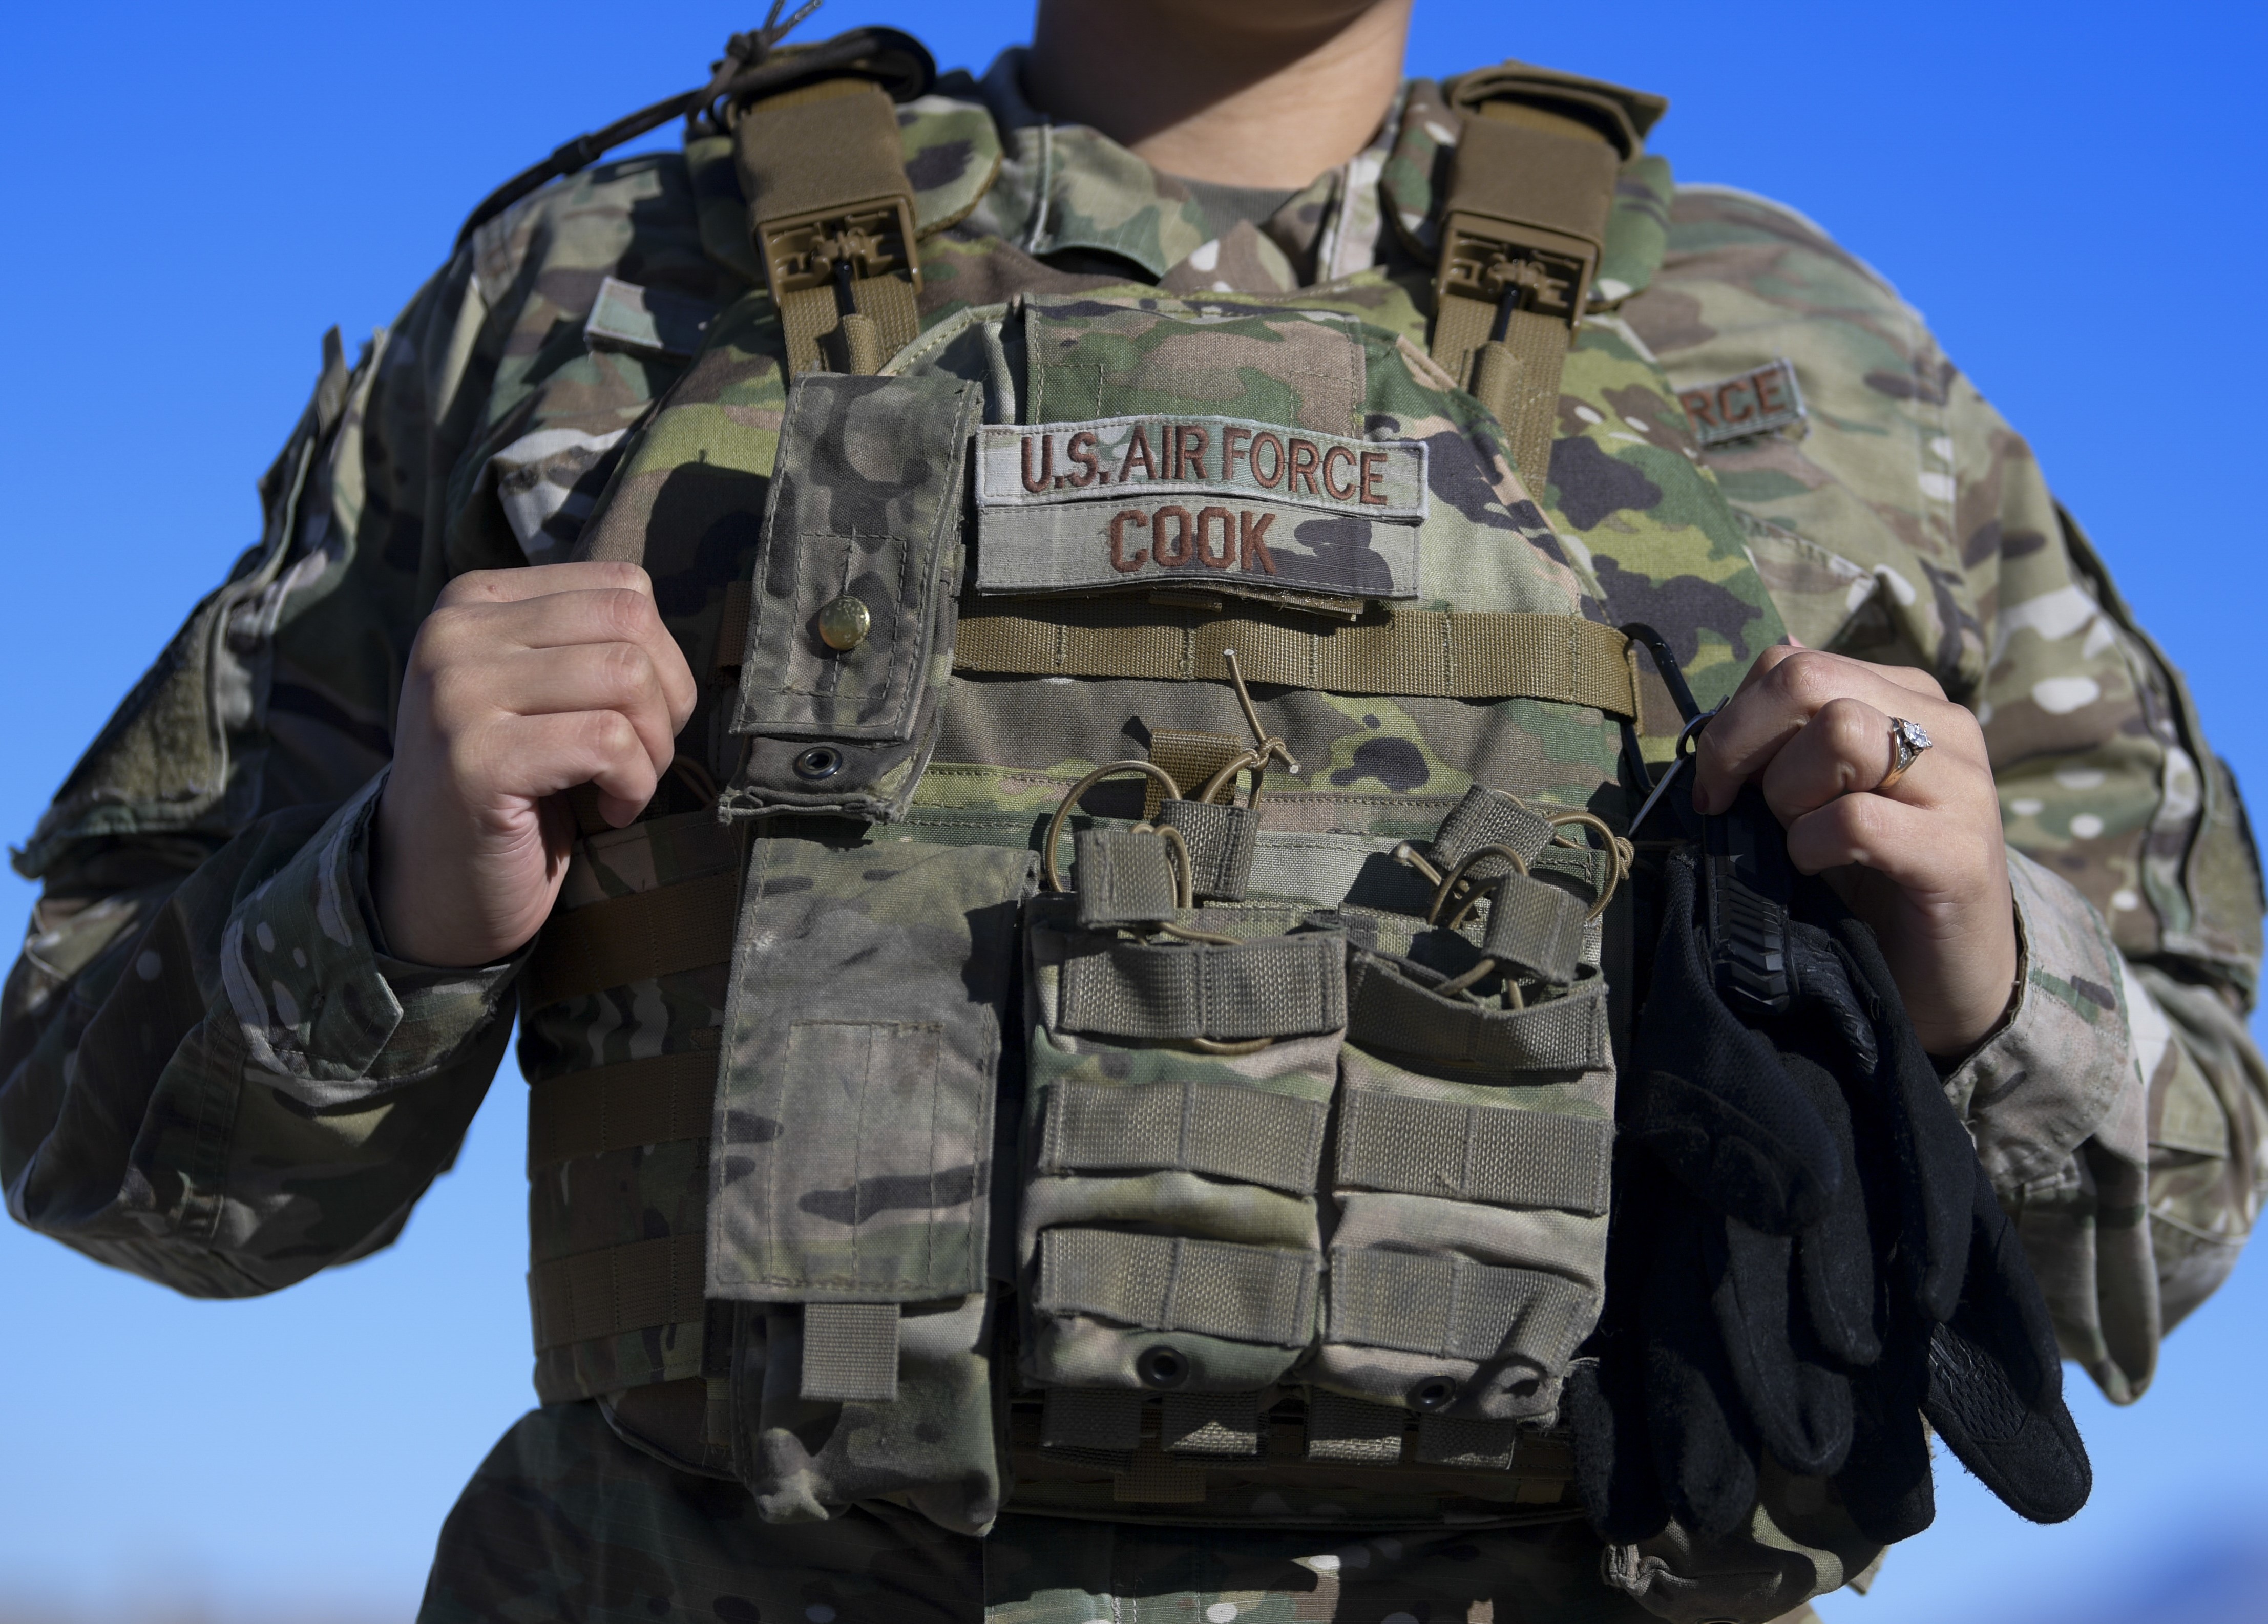 Body Armor Plate: Unleash Maximum Protection for Every Mission